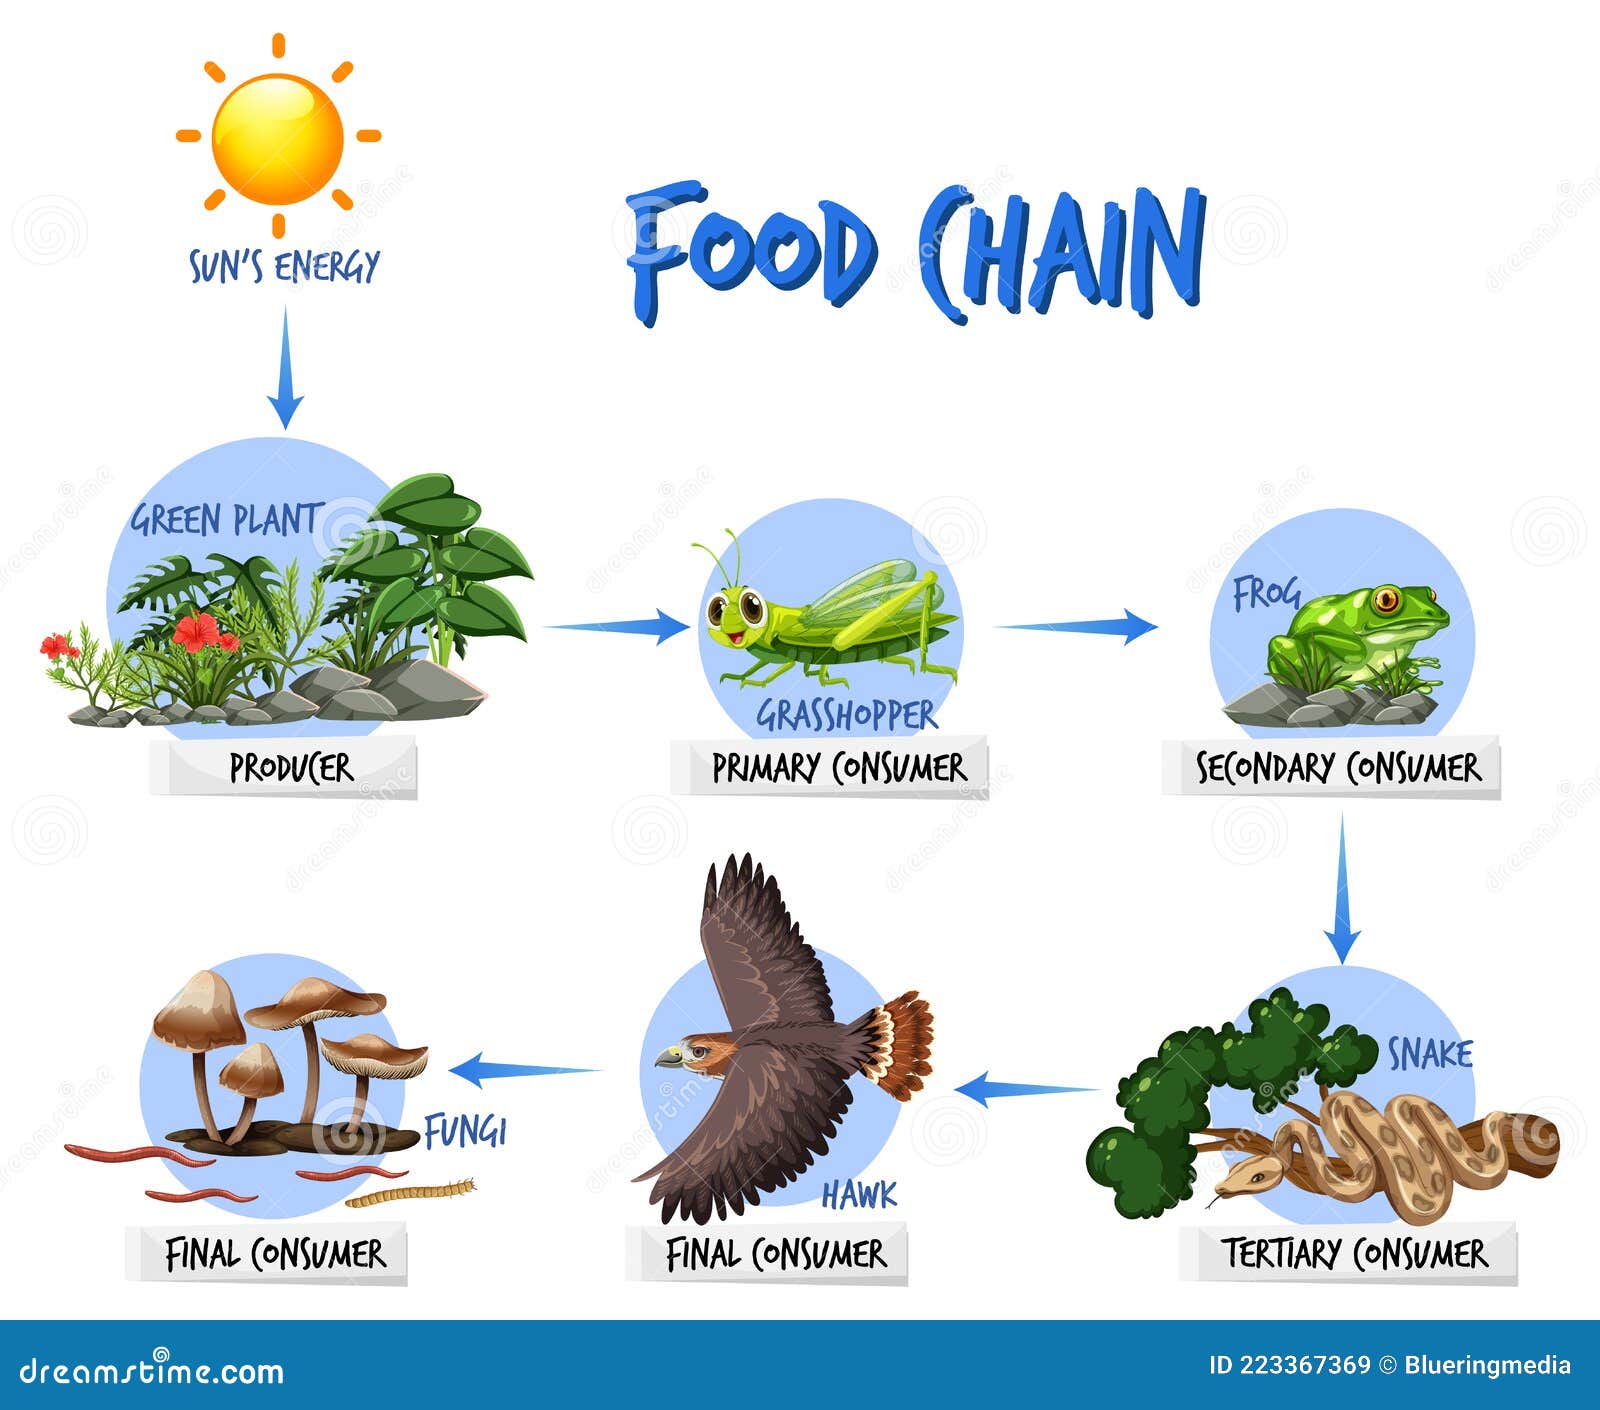 Food chain diagram concept stock vector. Illustration of food - 223367369